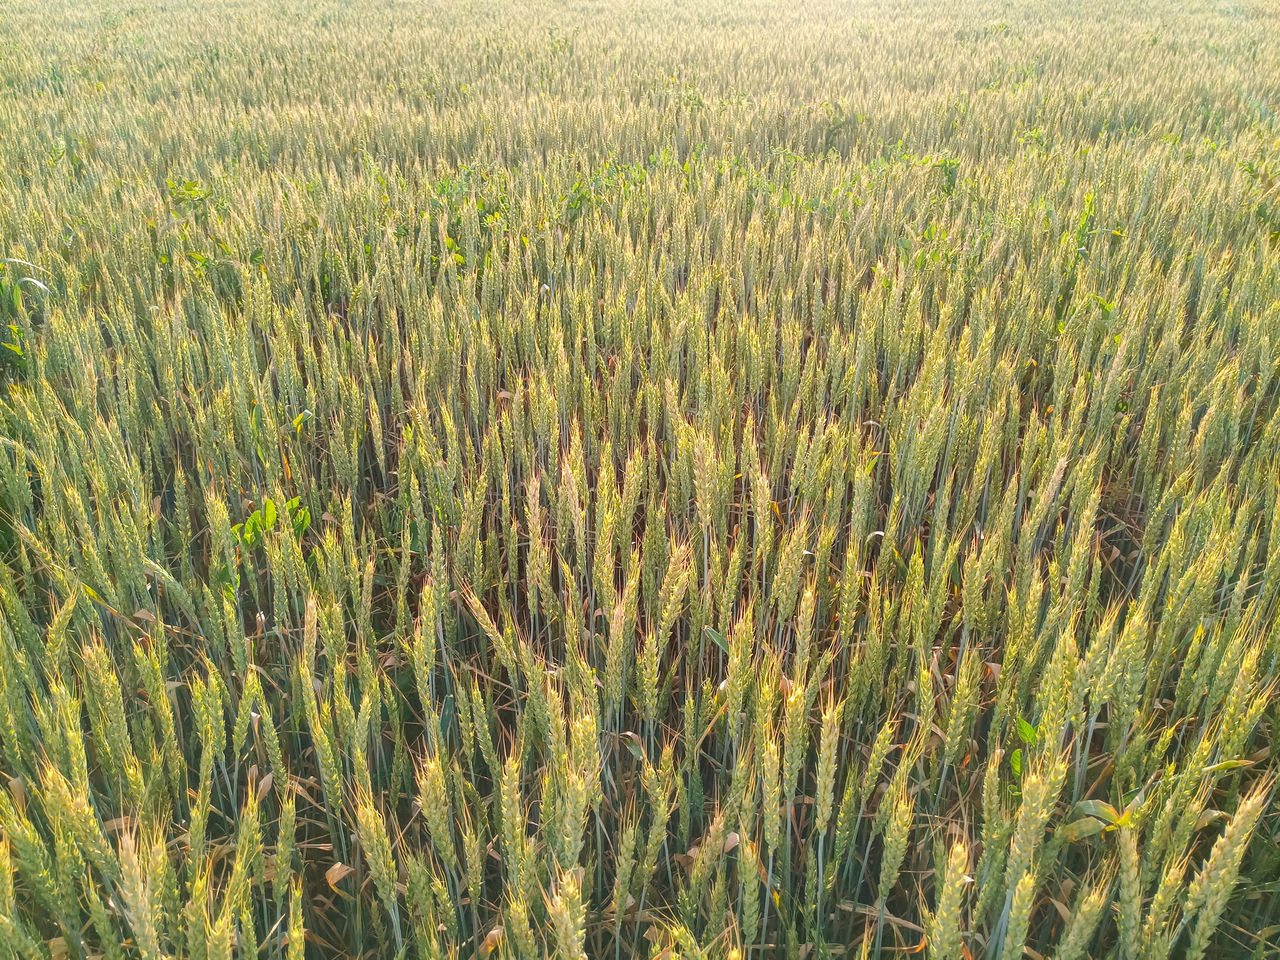 HIGH ANGLE VIEW OF STALKS IN FIELD AGAINST THE SKY